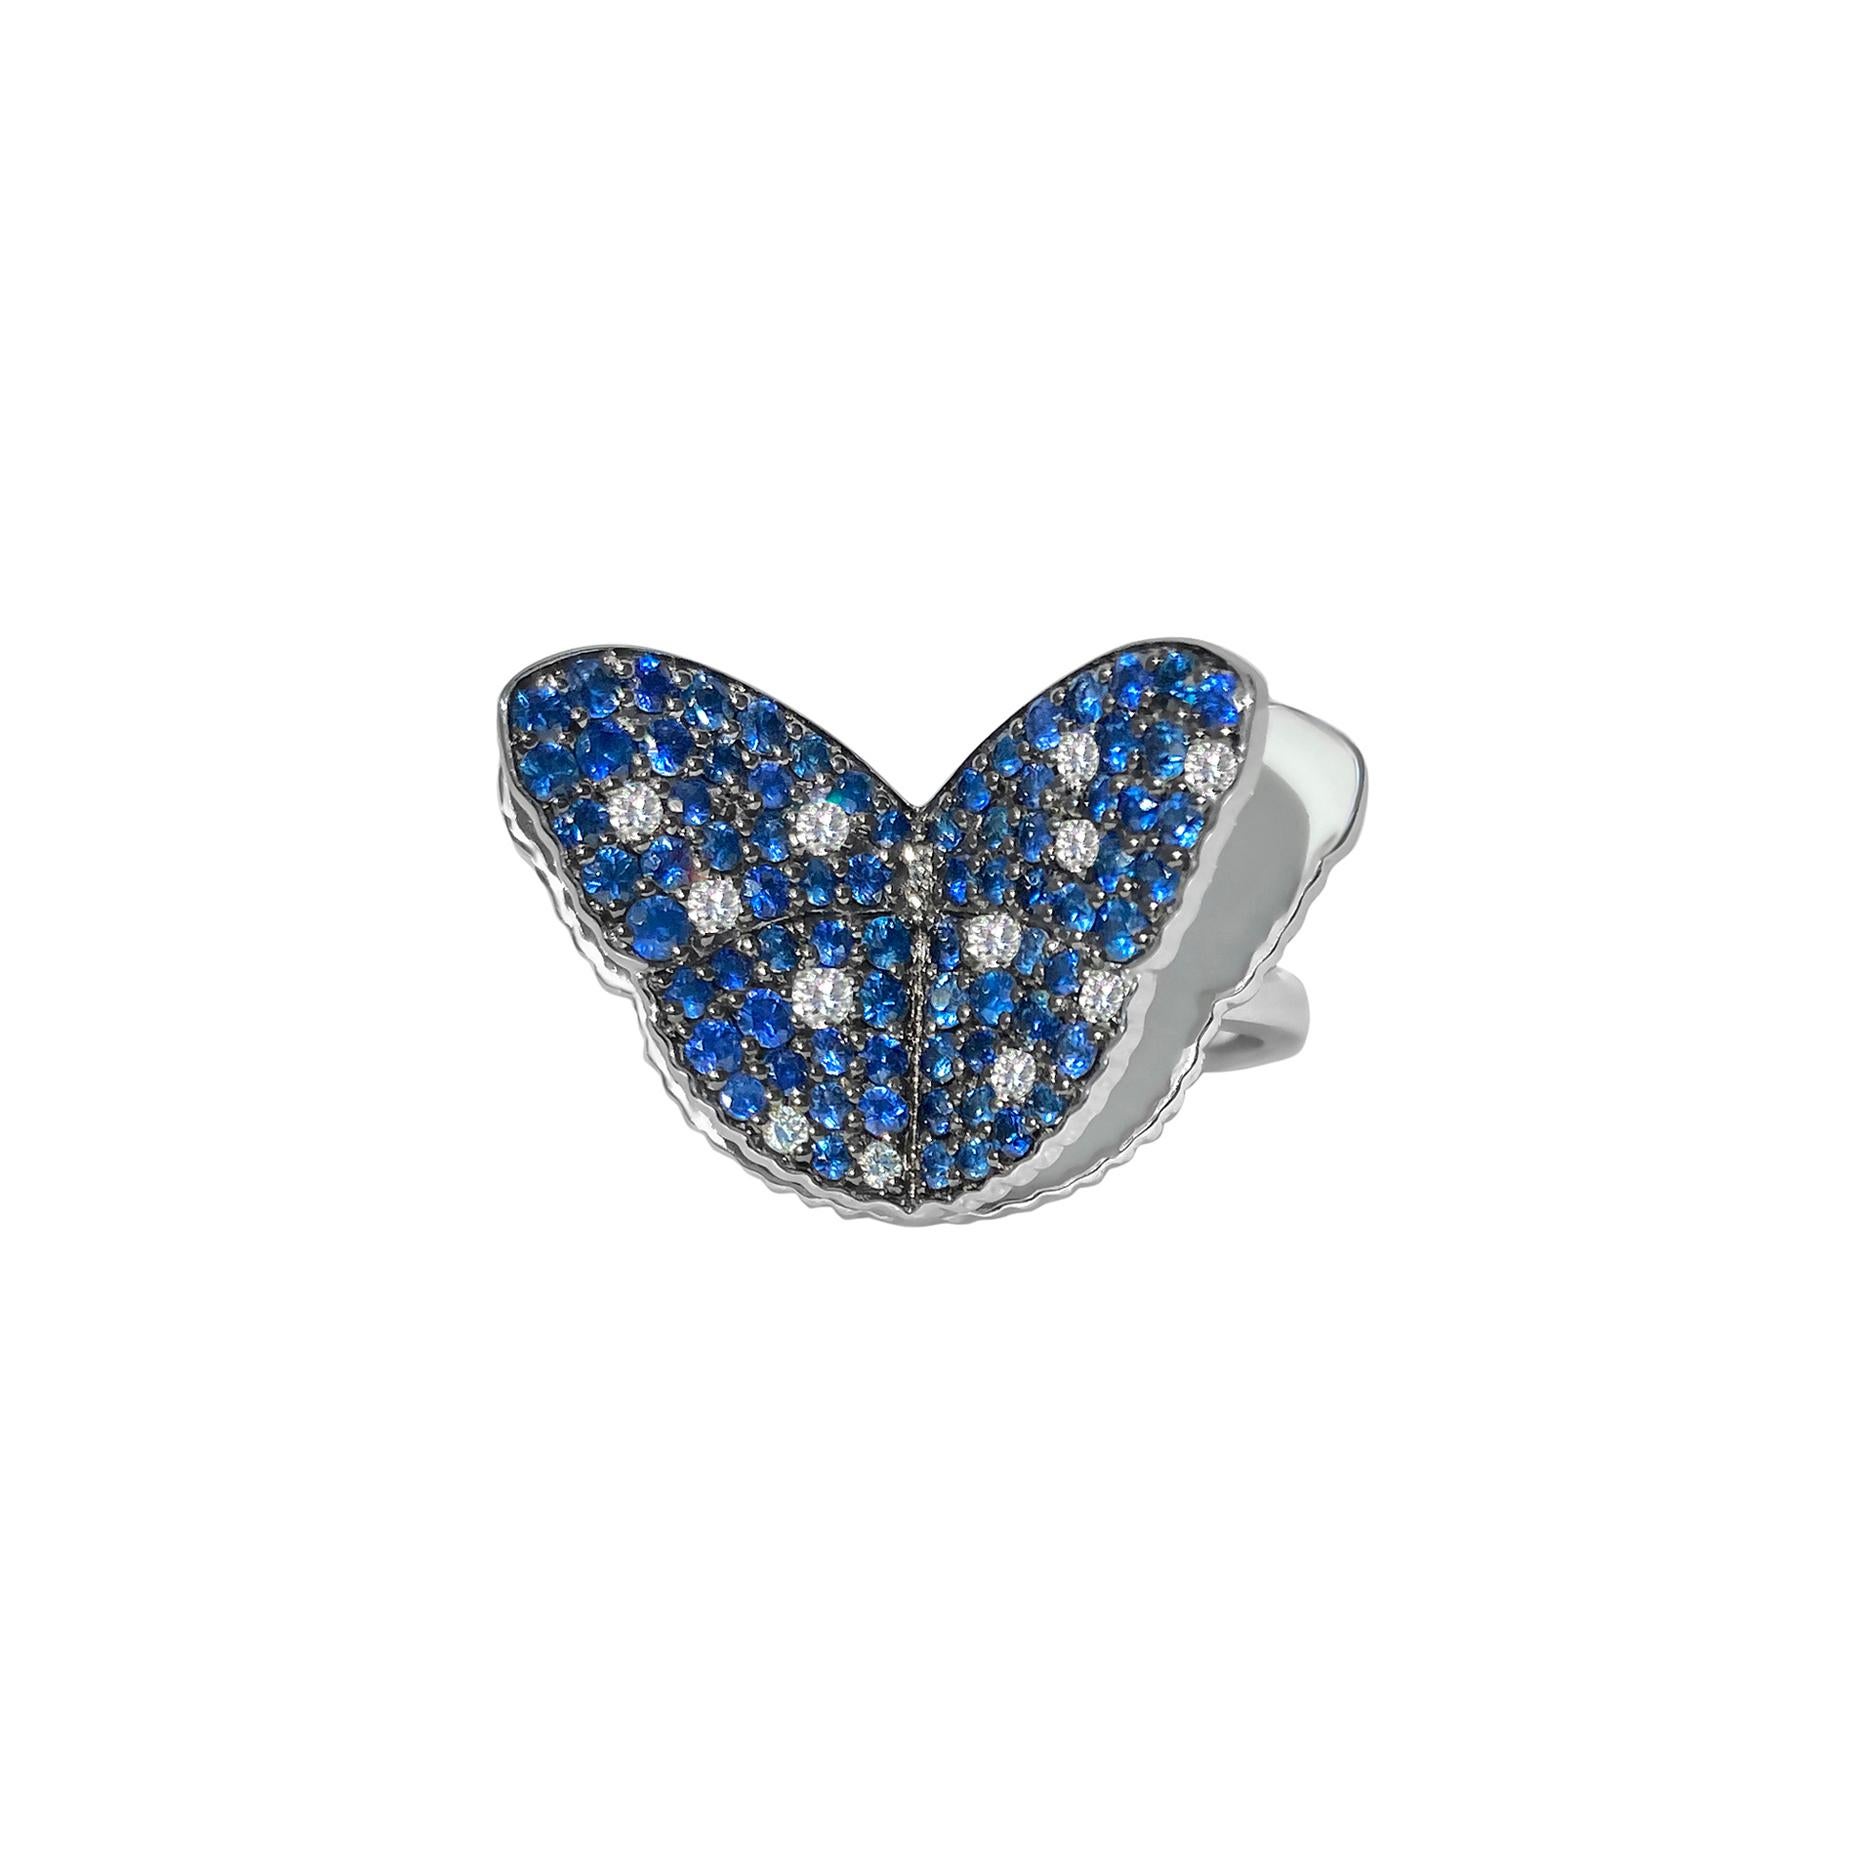 Butterflies are symbols of new beginnings, resilience, endurance, rebirth, transformation, hope and life.
A collection symbolizing a special life moment or a new chapter in our life, the Memento collection is a luxurious and modern representation of